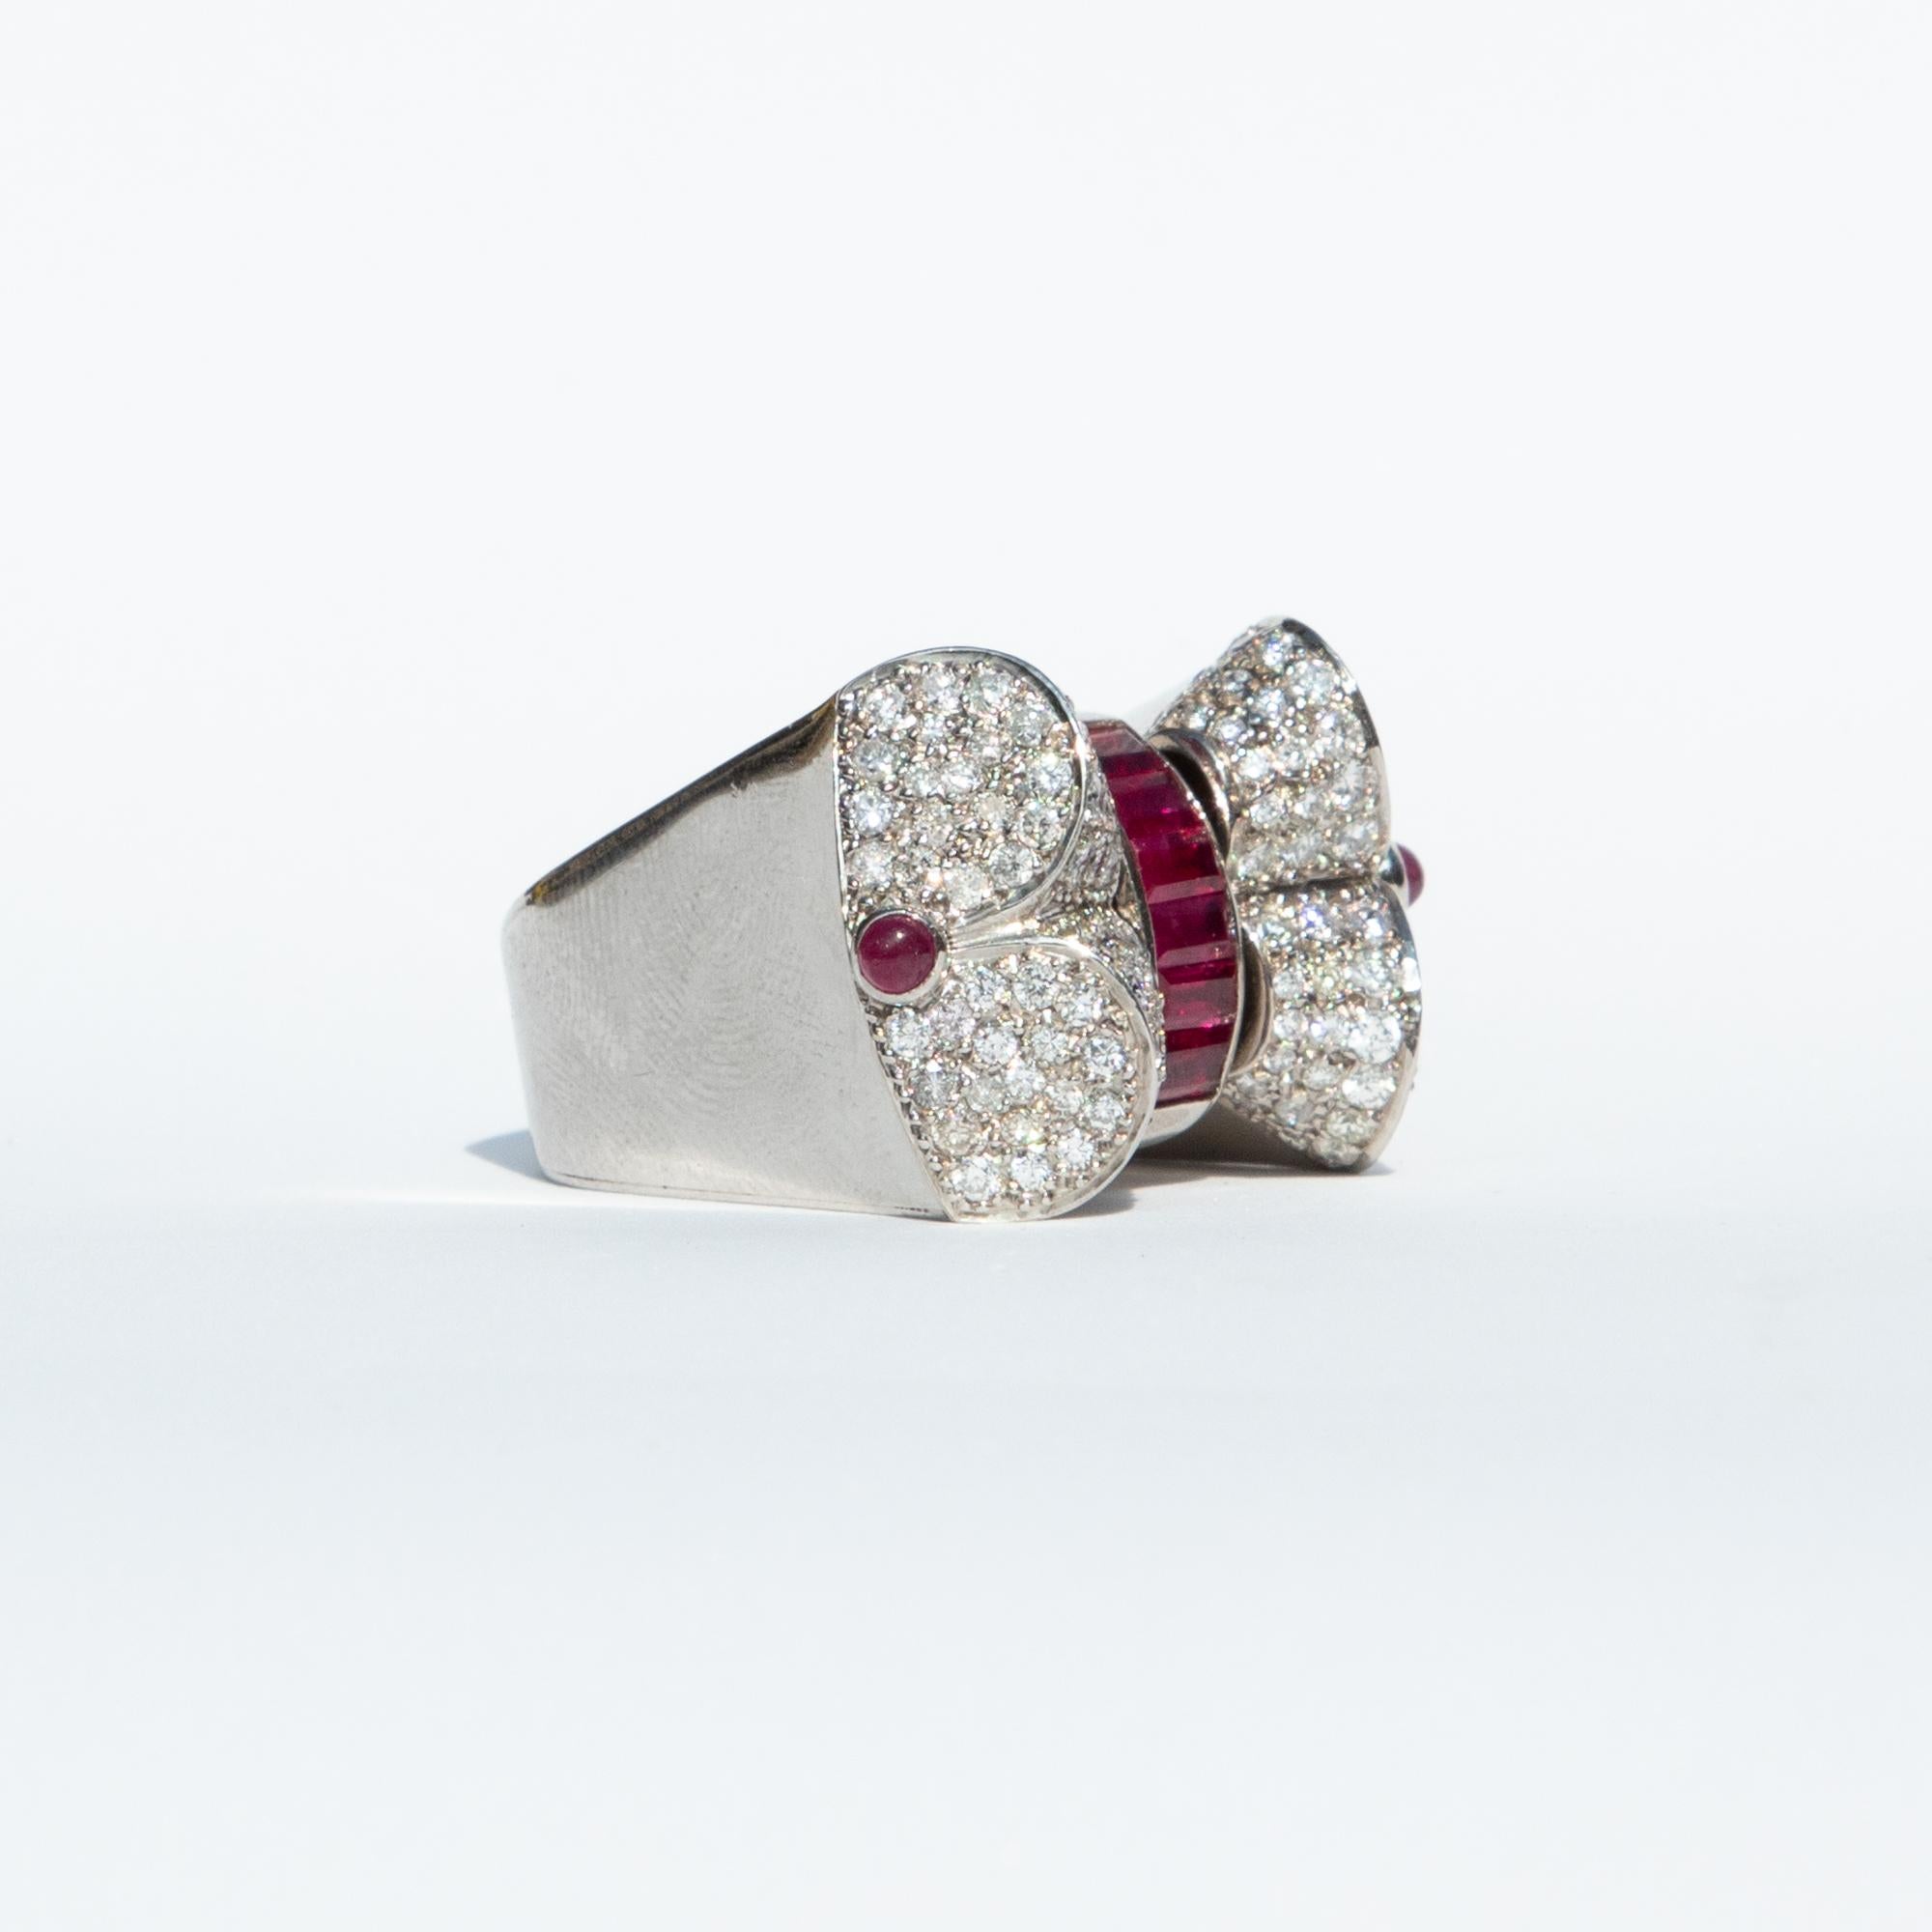 Romantic 1940s Cocktail Ring with Swivelling Diamond or Ruby